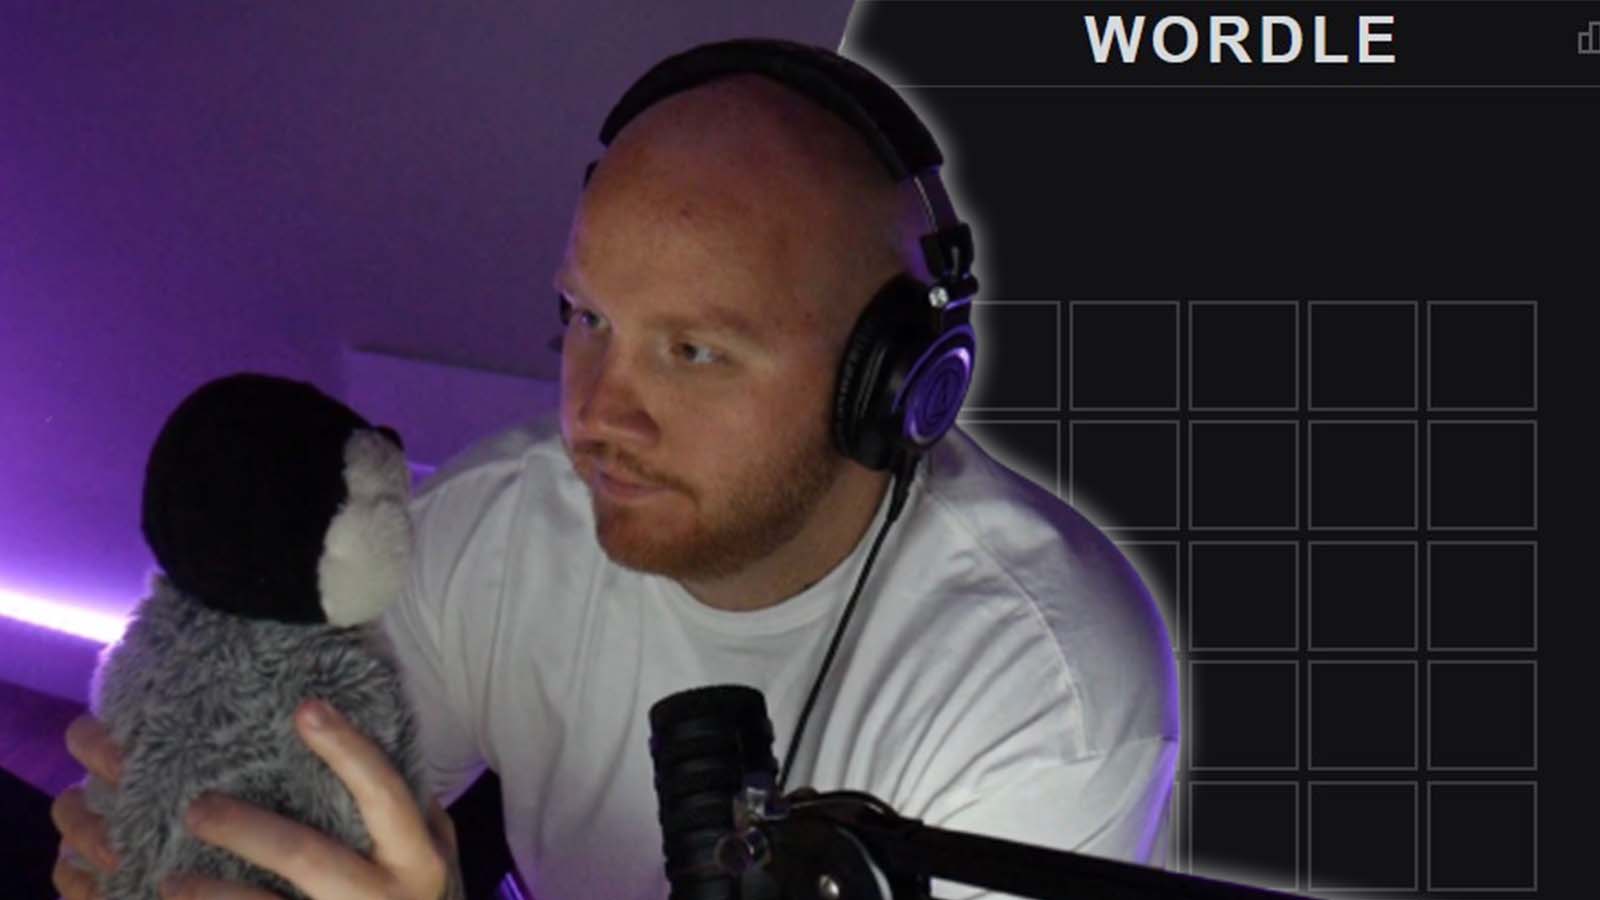 TIMTHETATMAN PLAYS NFL WORDLE AND SHOWS HE'S A FOOTBALL FAN 